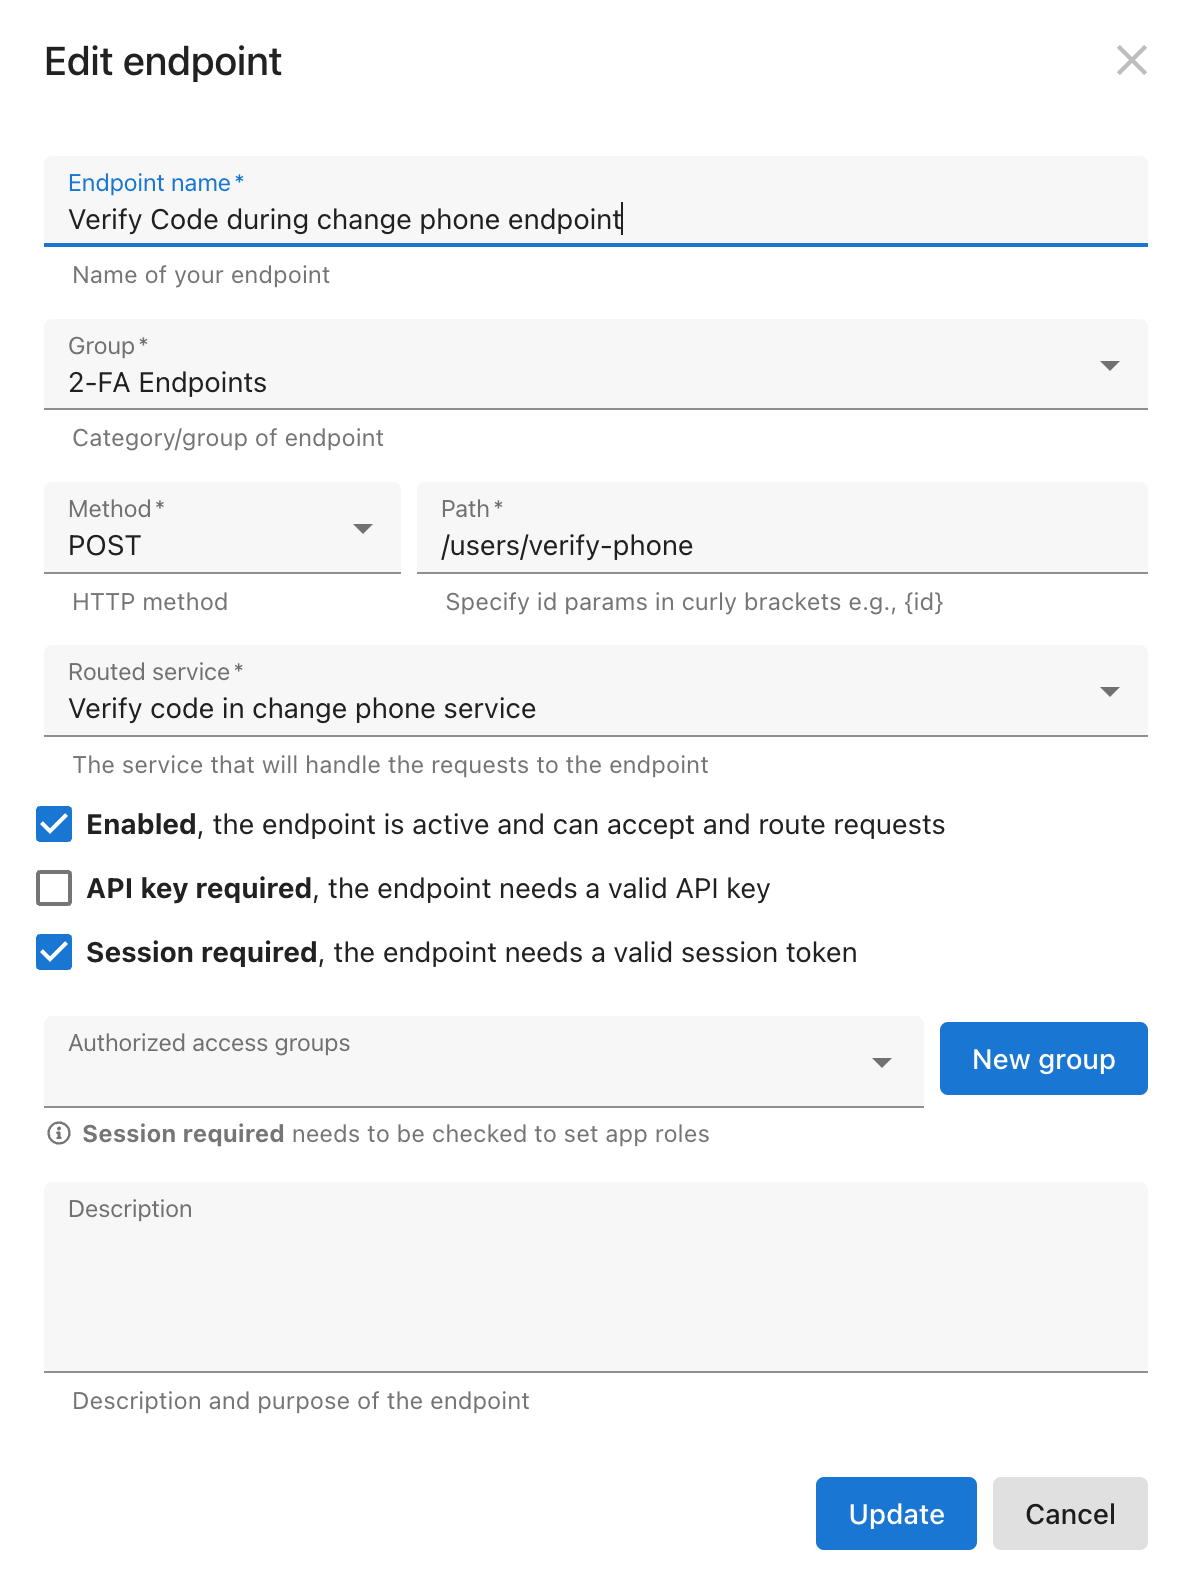 Verify code during changing phone endpoint